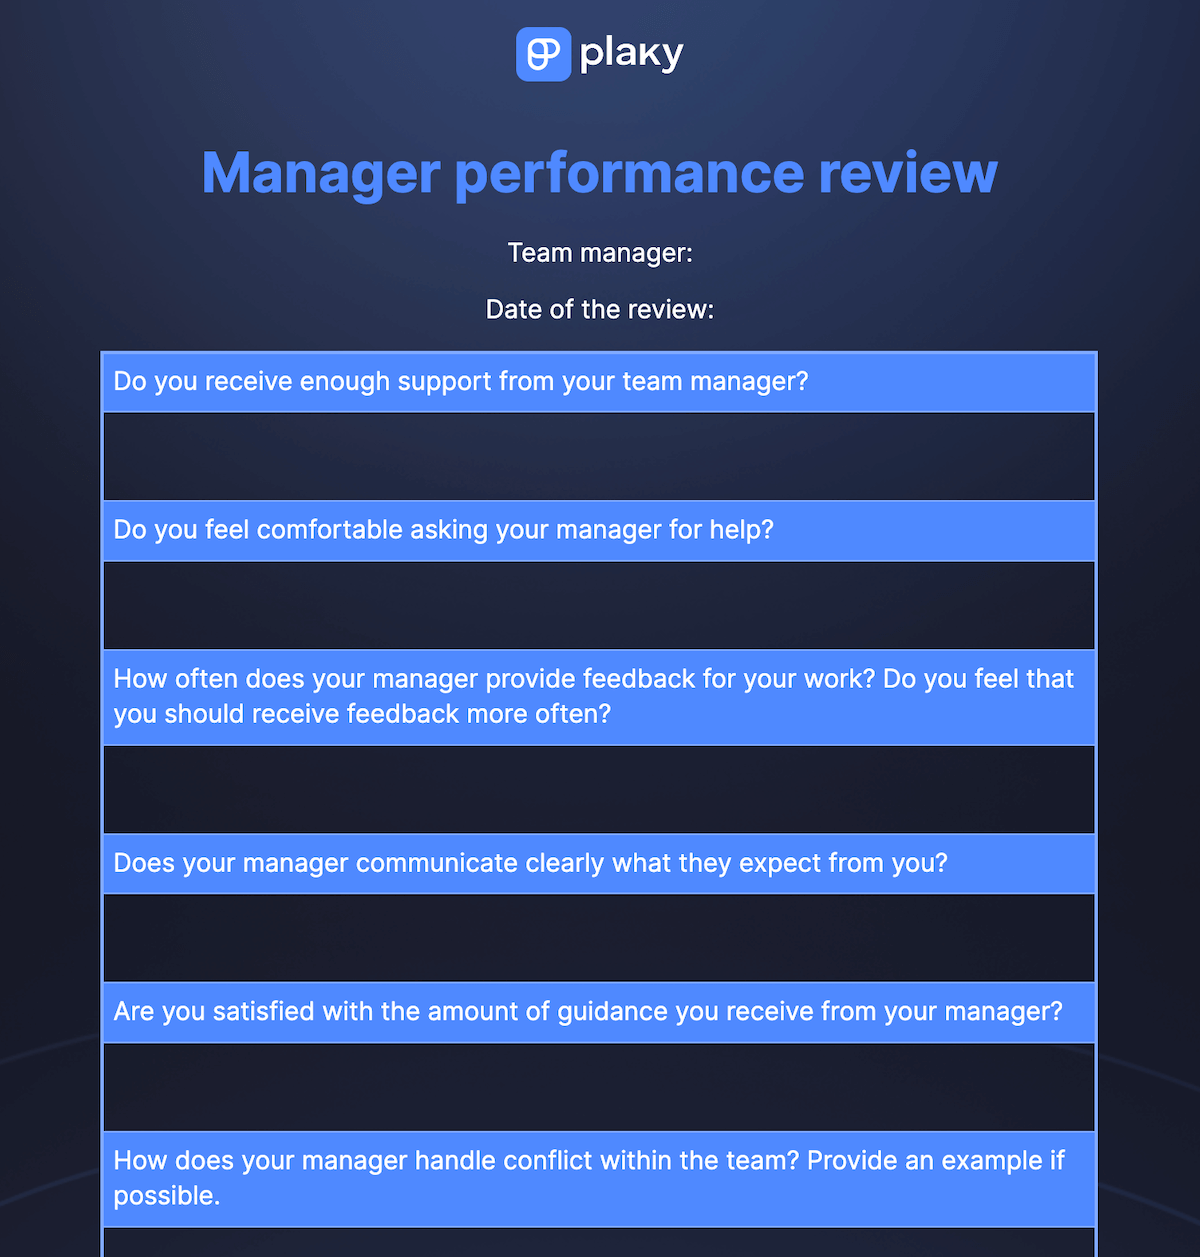 Menager performance review